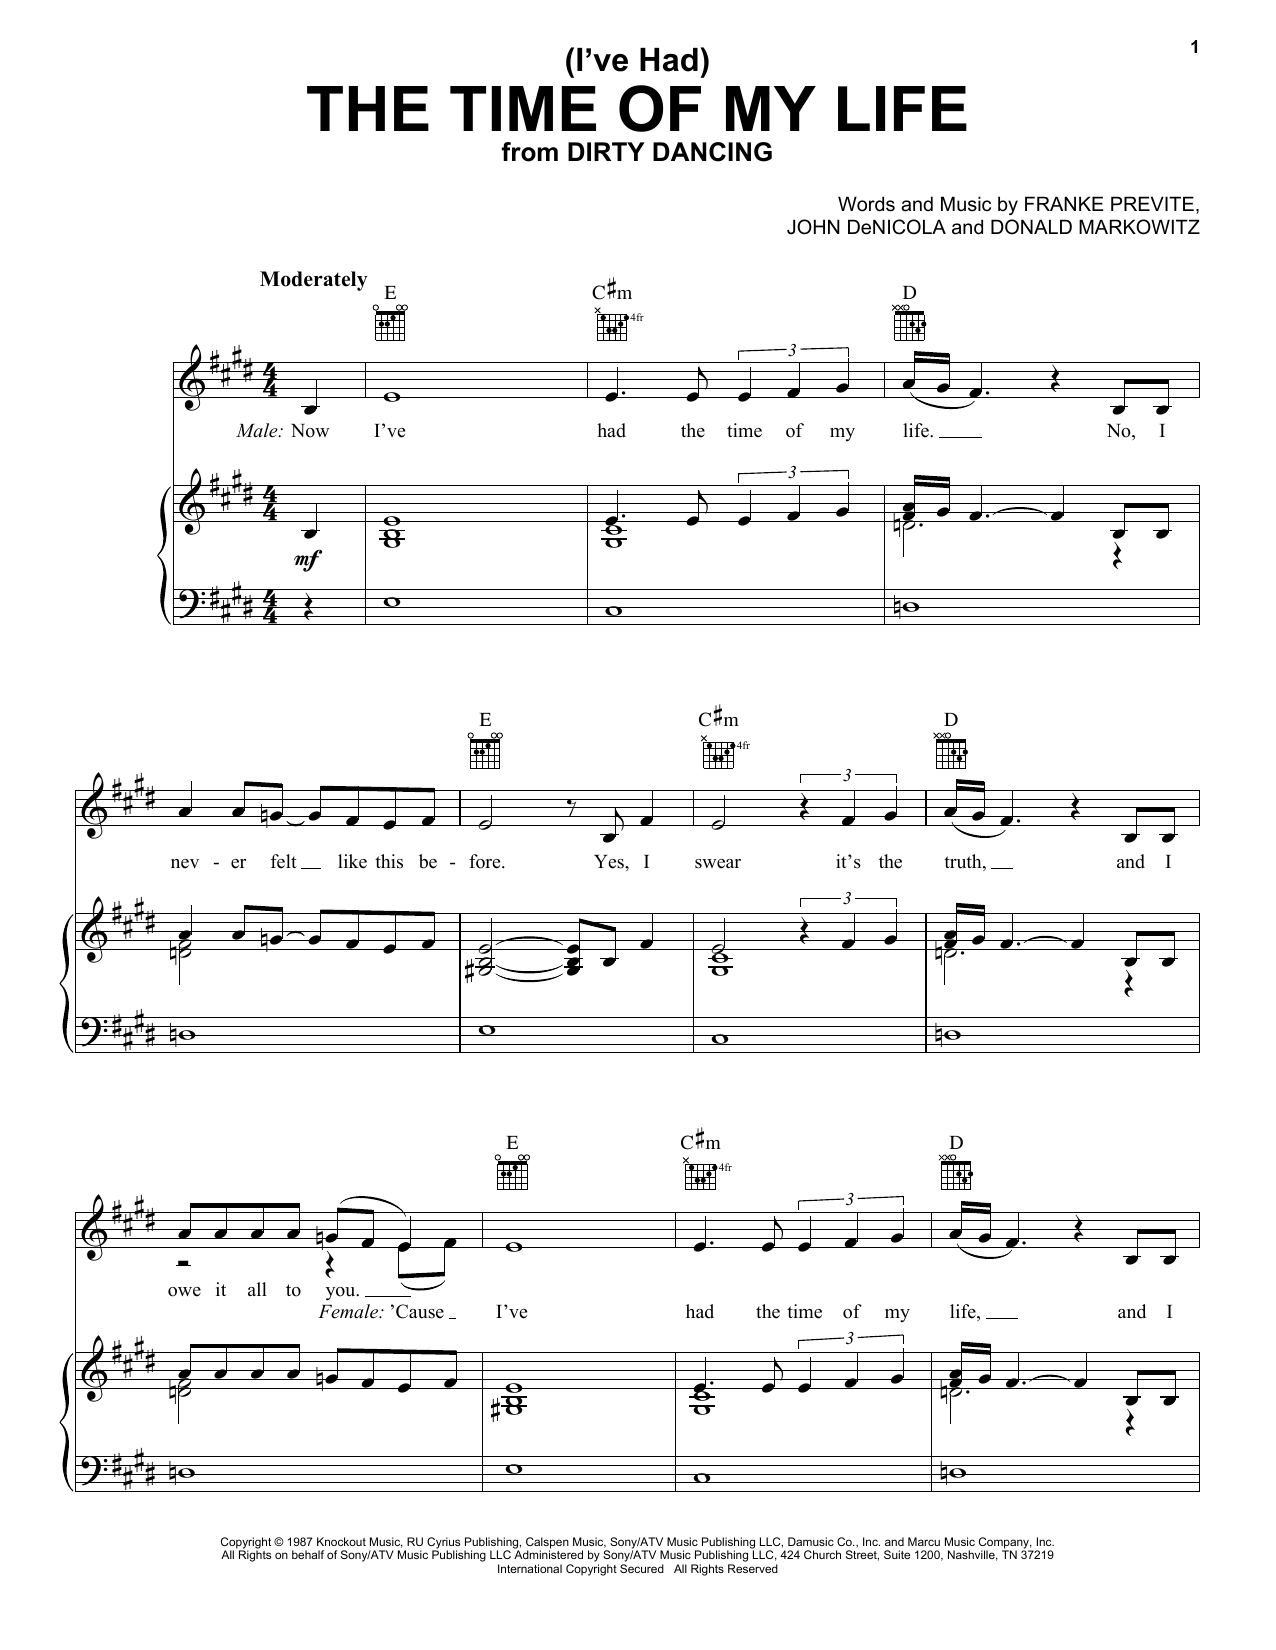 Bill Medley & Jennifer Warnes (I've Had) The Time Of My Life sheet music notes and chords. Download Printable PDF.